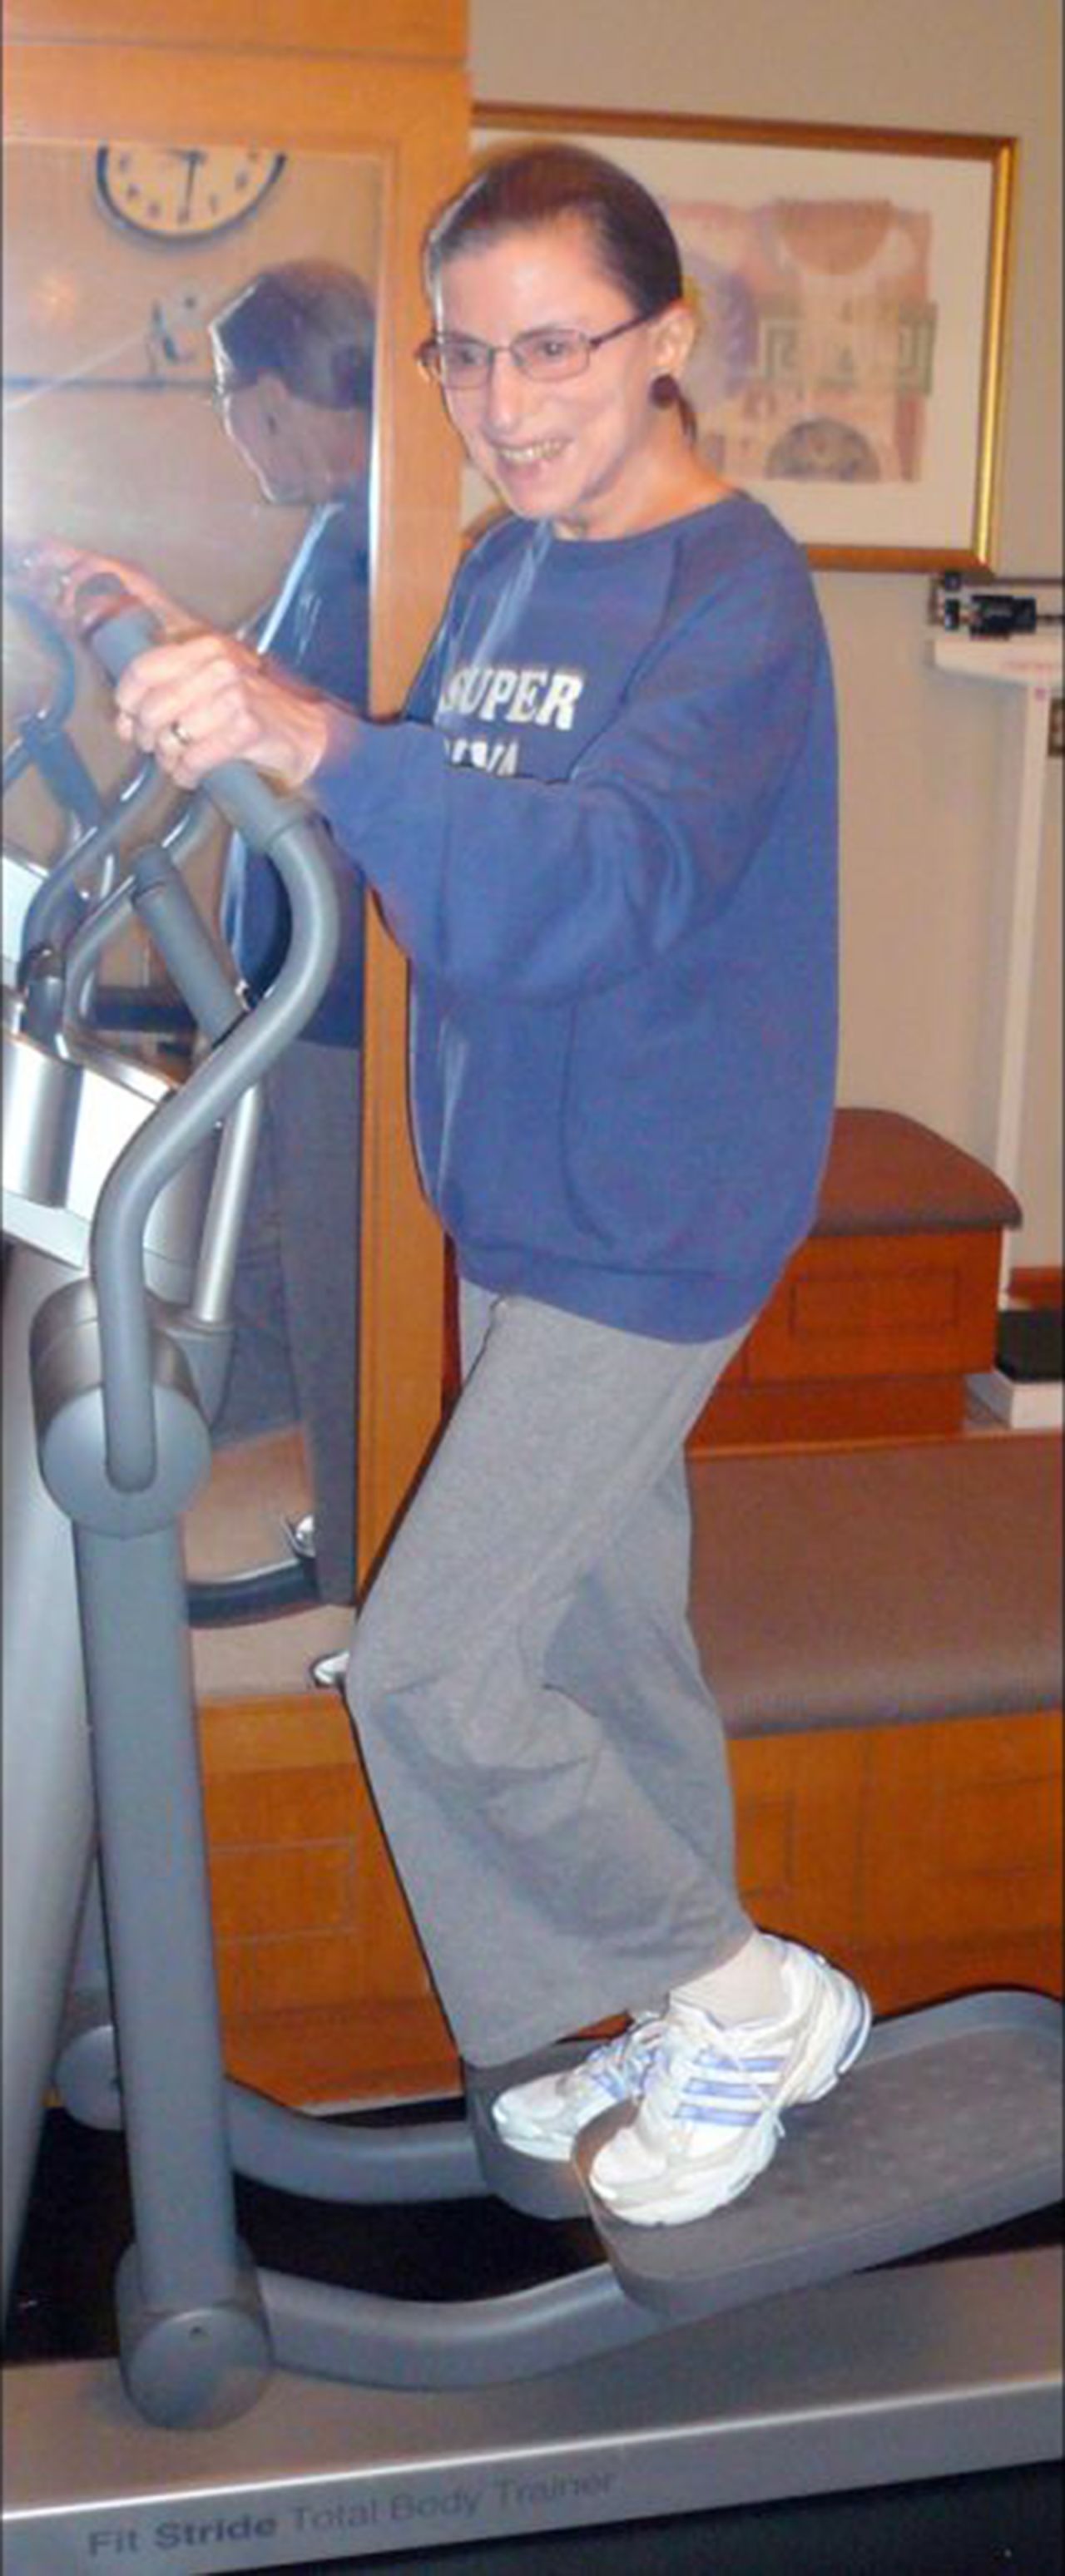 Ginsburg wears a "Super Diva" sweatshirt as she works out at the Supreme Court in August 2007. 